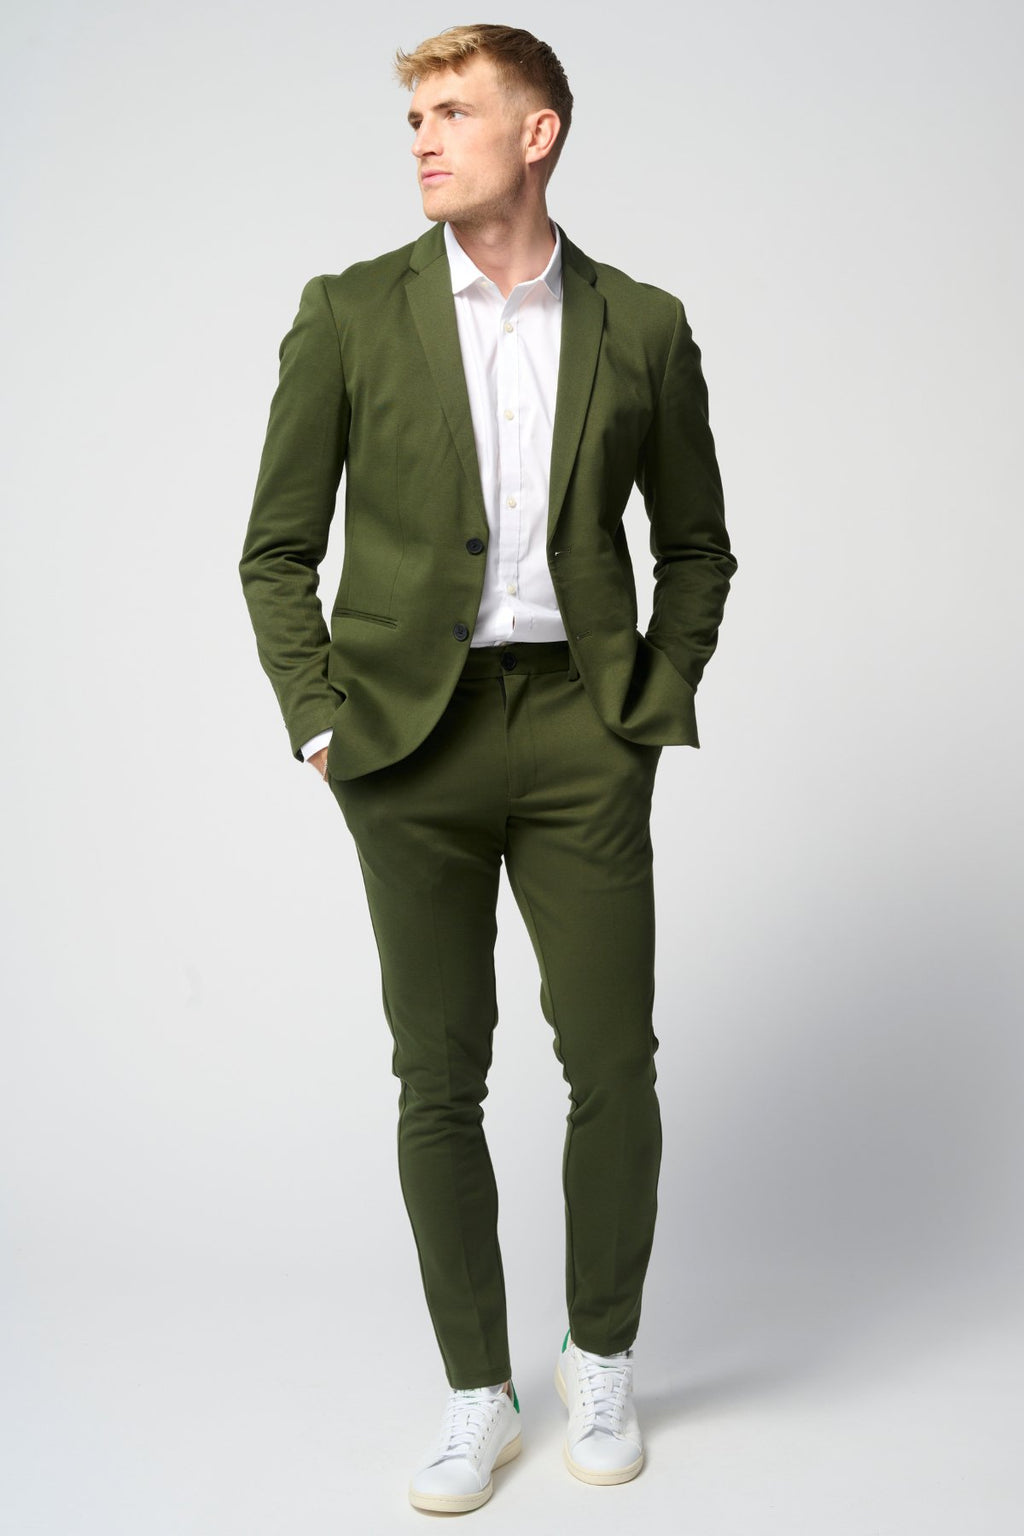 Performance Suit™️ (Verde scuro) + Performance Camicia - Offerta pacchetto